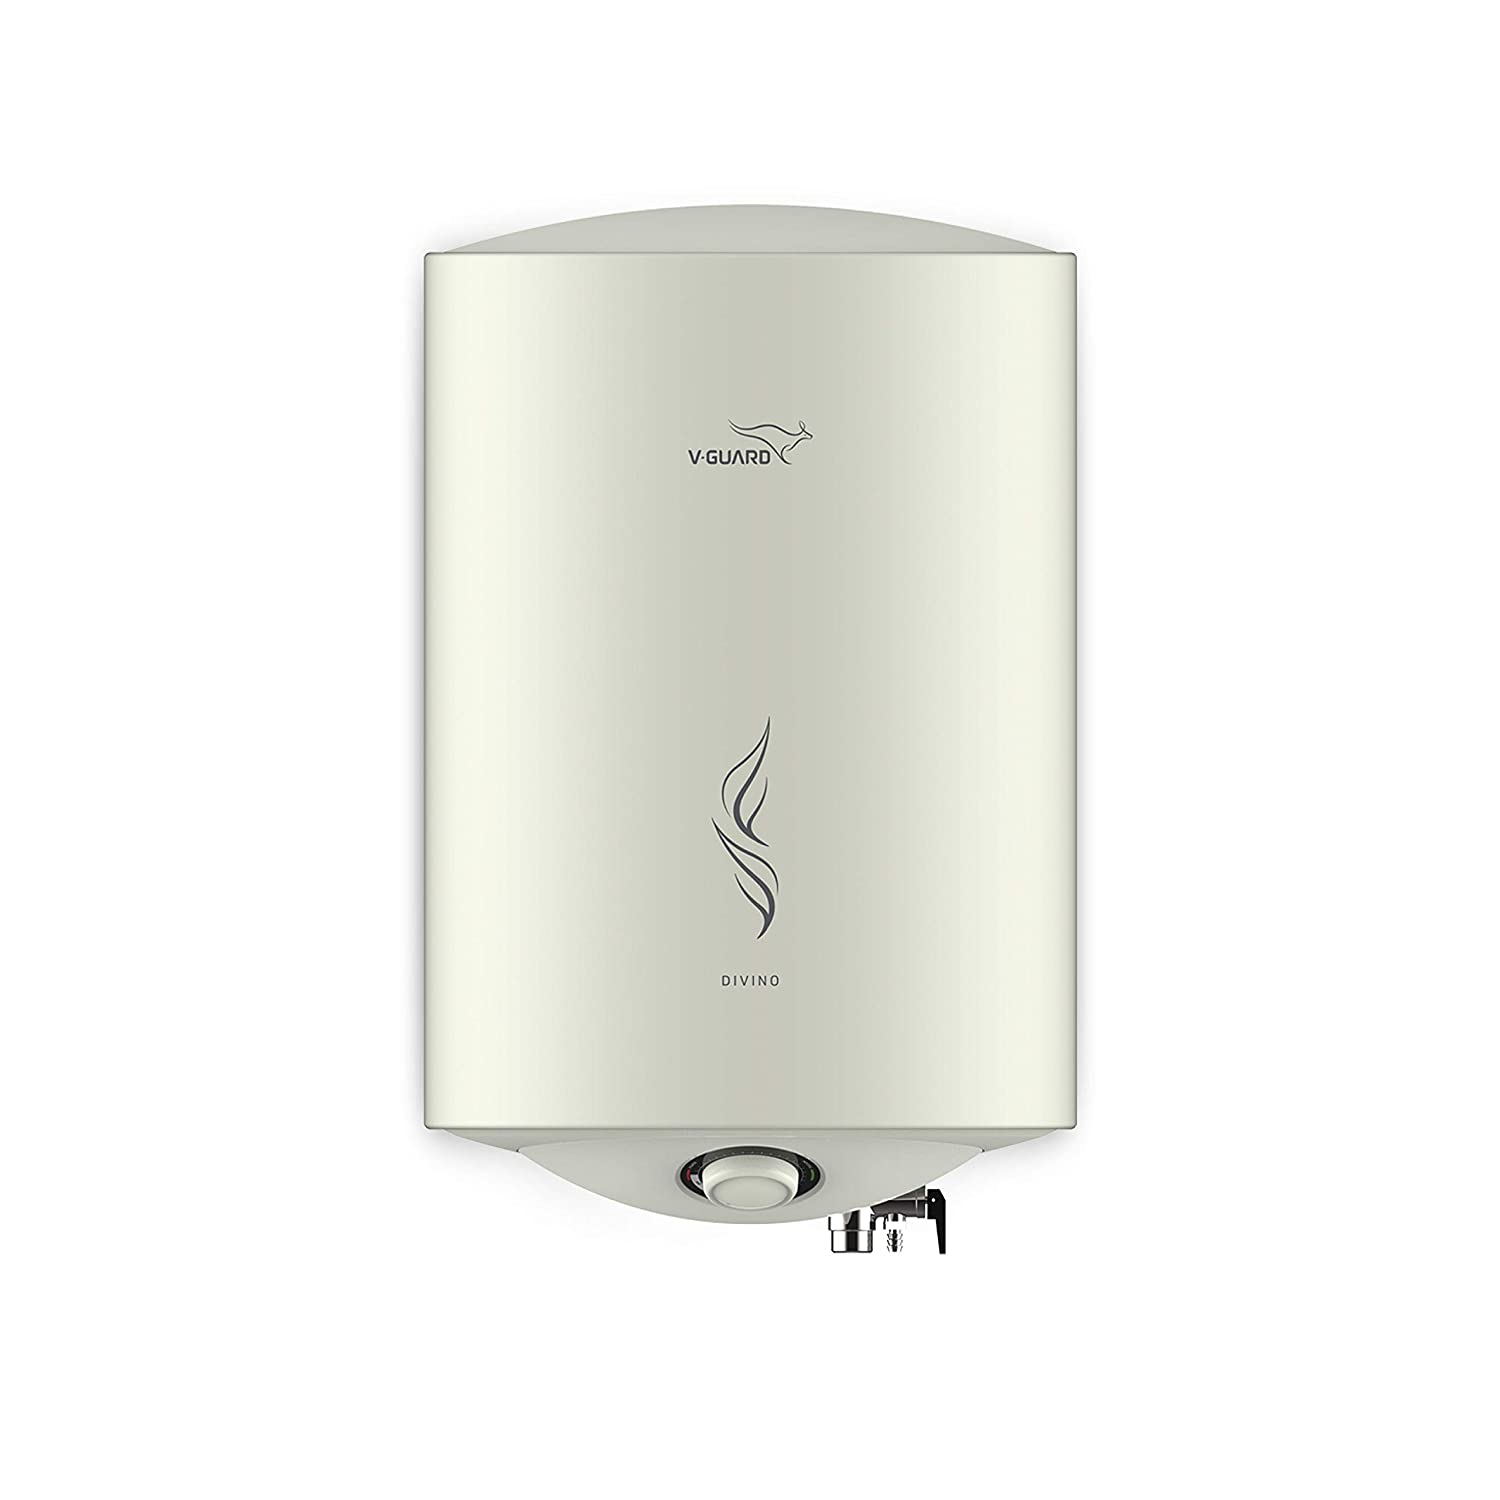 V-Guard Divino 5 Star Rated 25 Litre Storage Water Heater